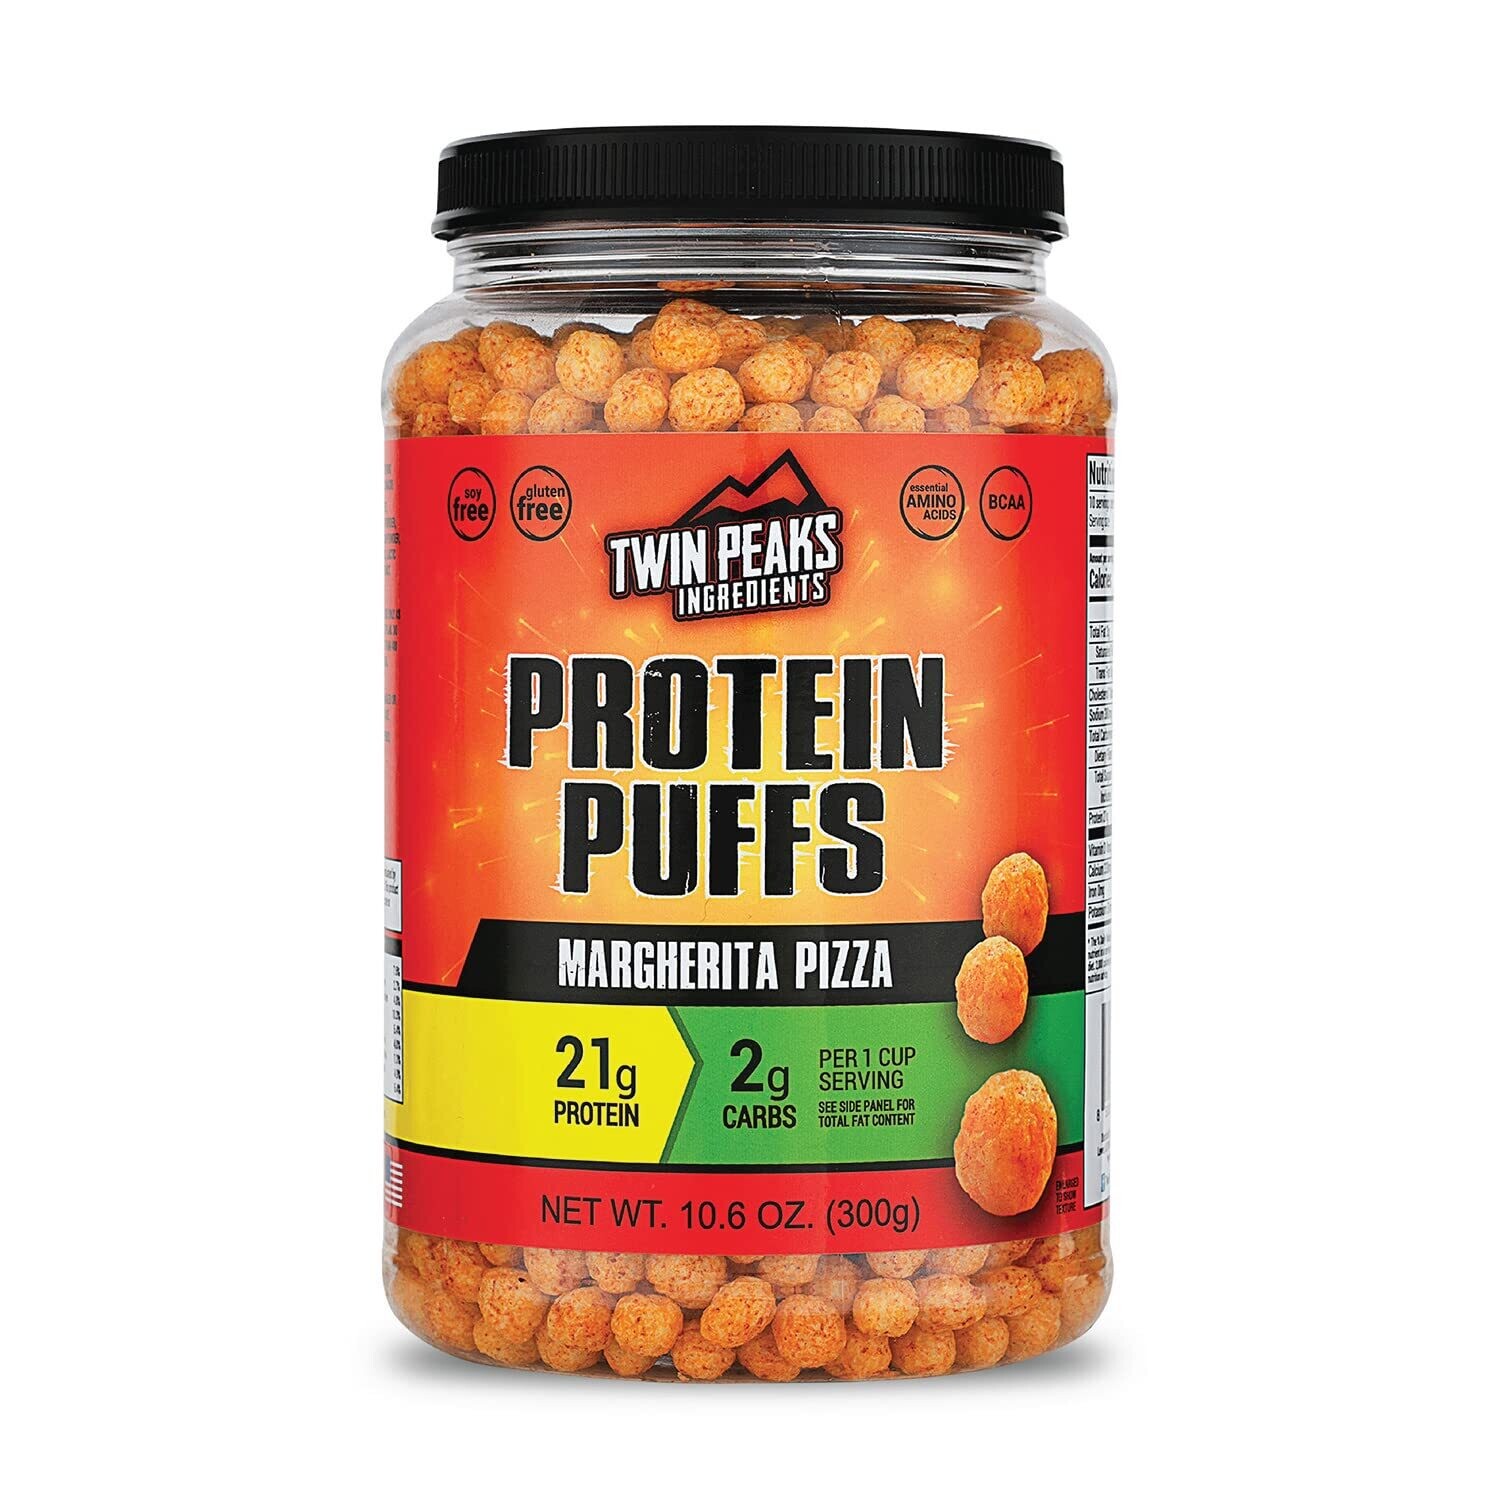 TWIN PEAKS - PROTEIN PUFFS 300G MARGHERITA PIZZA